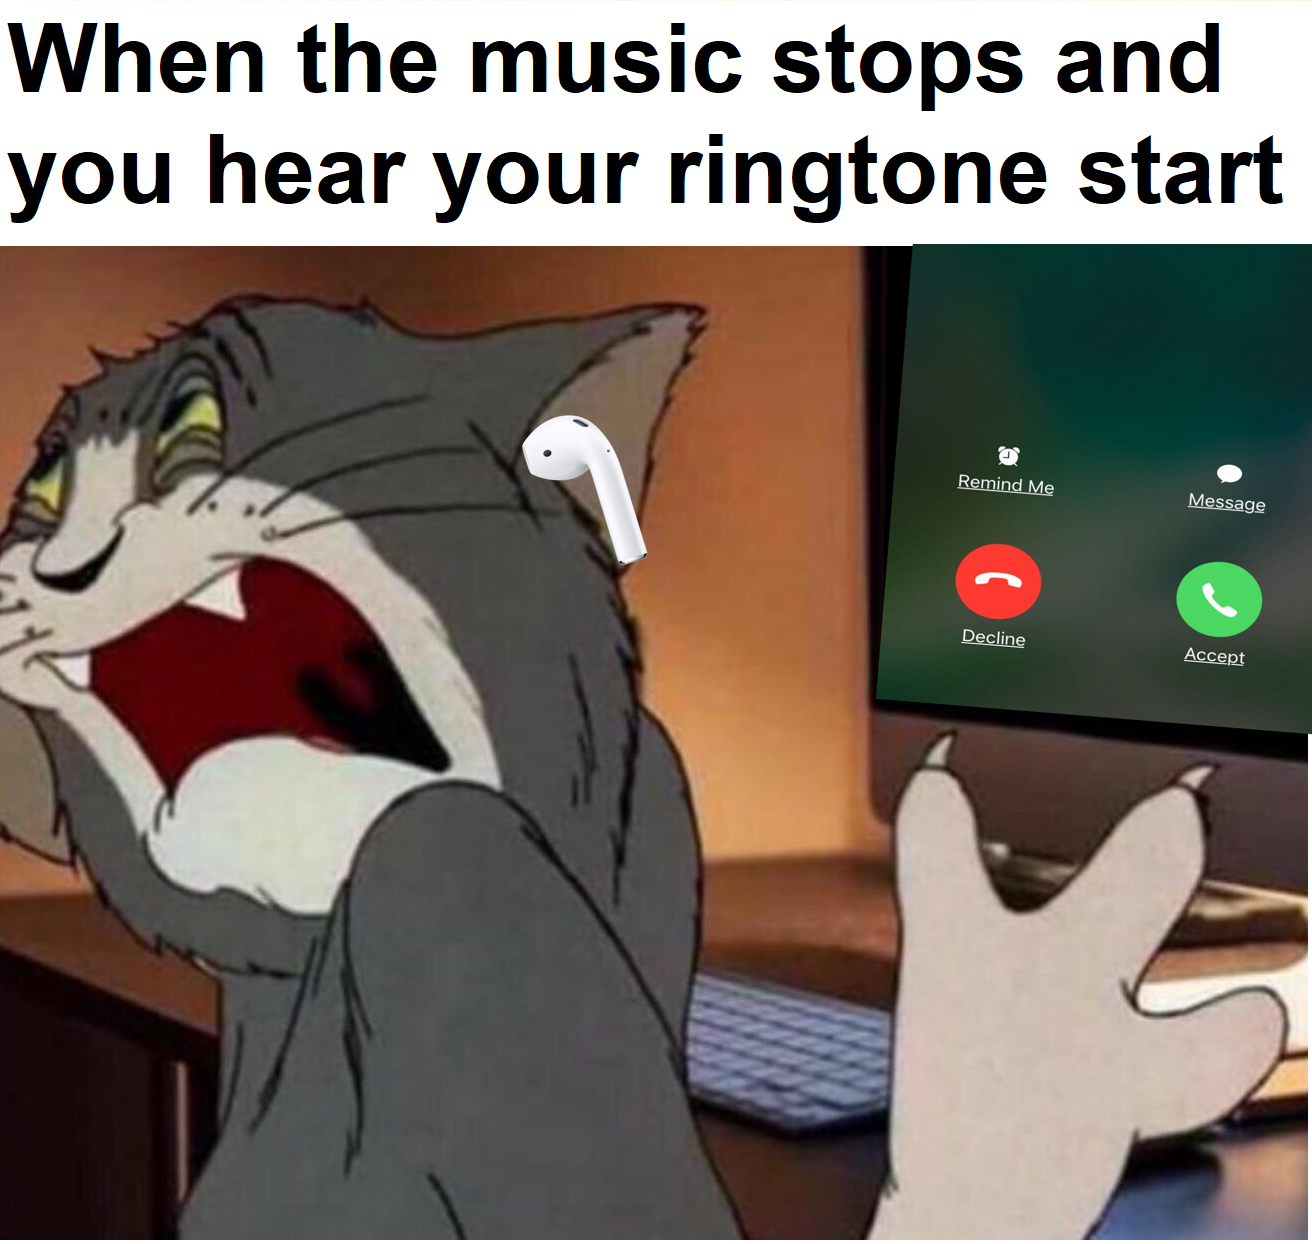 dank memes - funny memes - northwest vista college - When the music stops and you hear your ringtone start Remind Me Message Dechy Acces